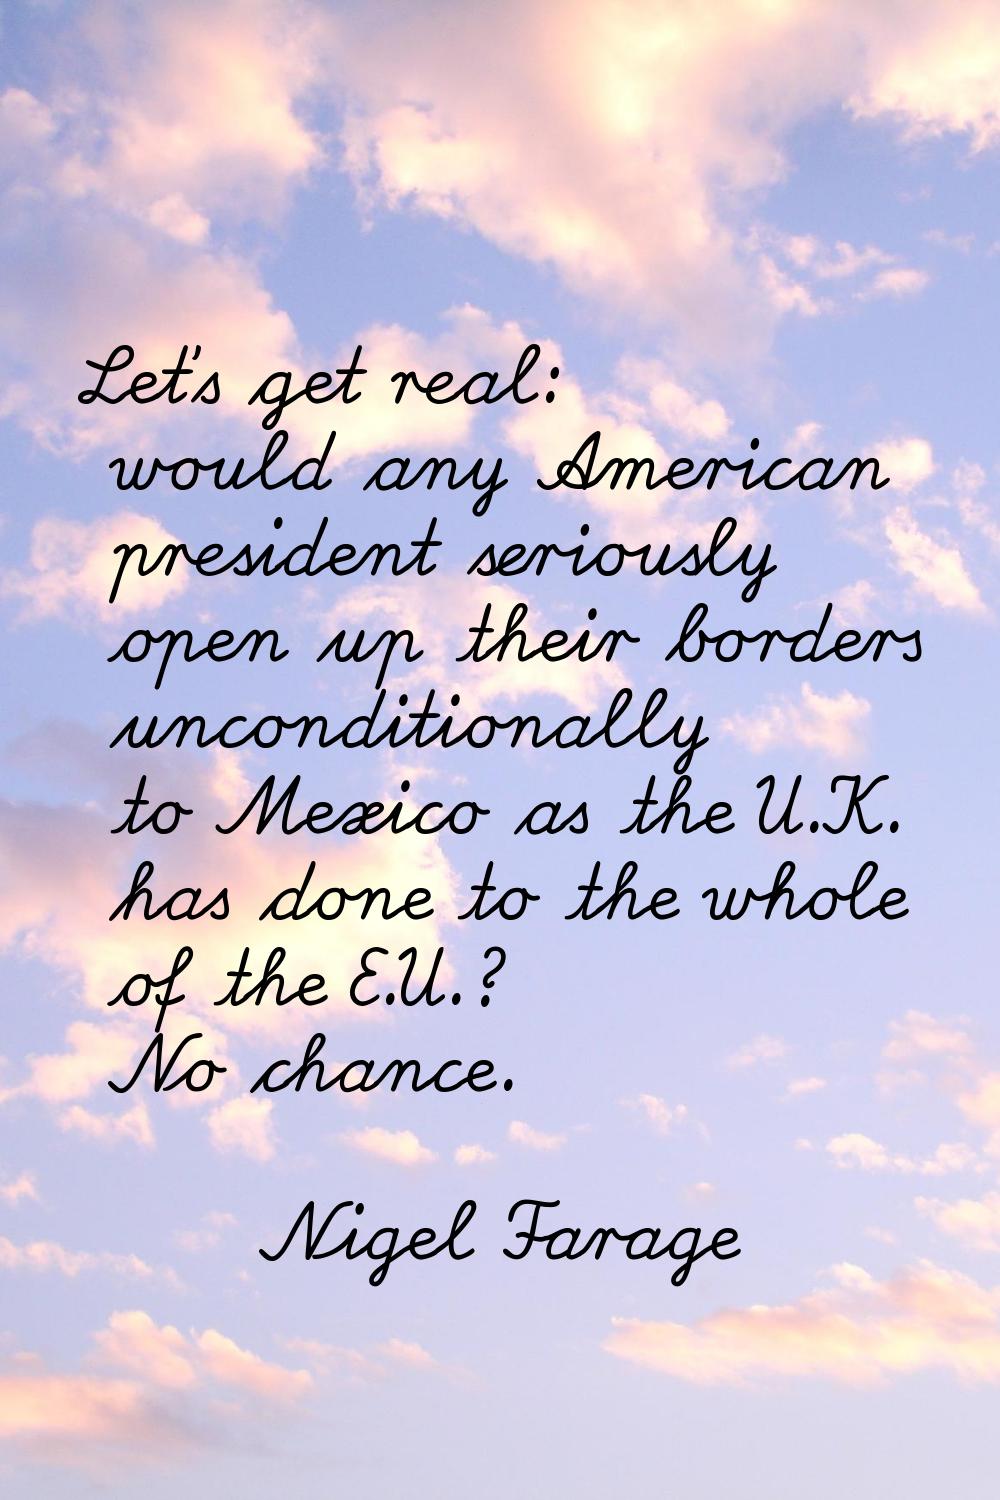 Let's get real: would any American president seriously open up their borders unconditionally to Mex